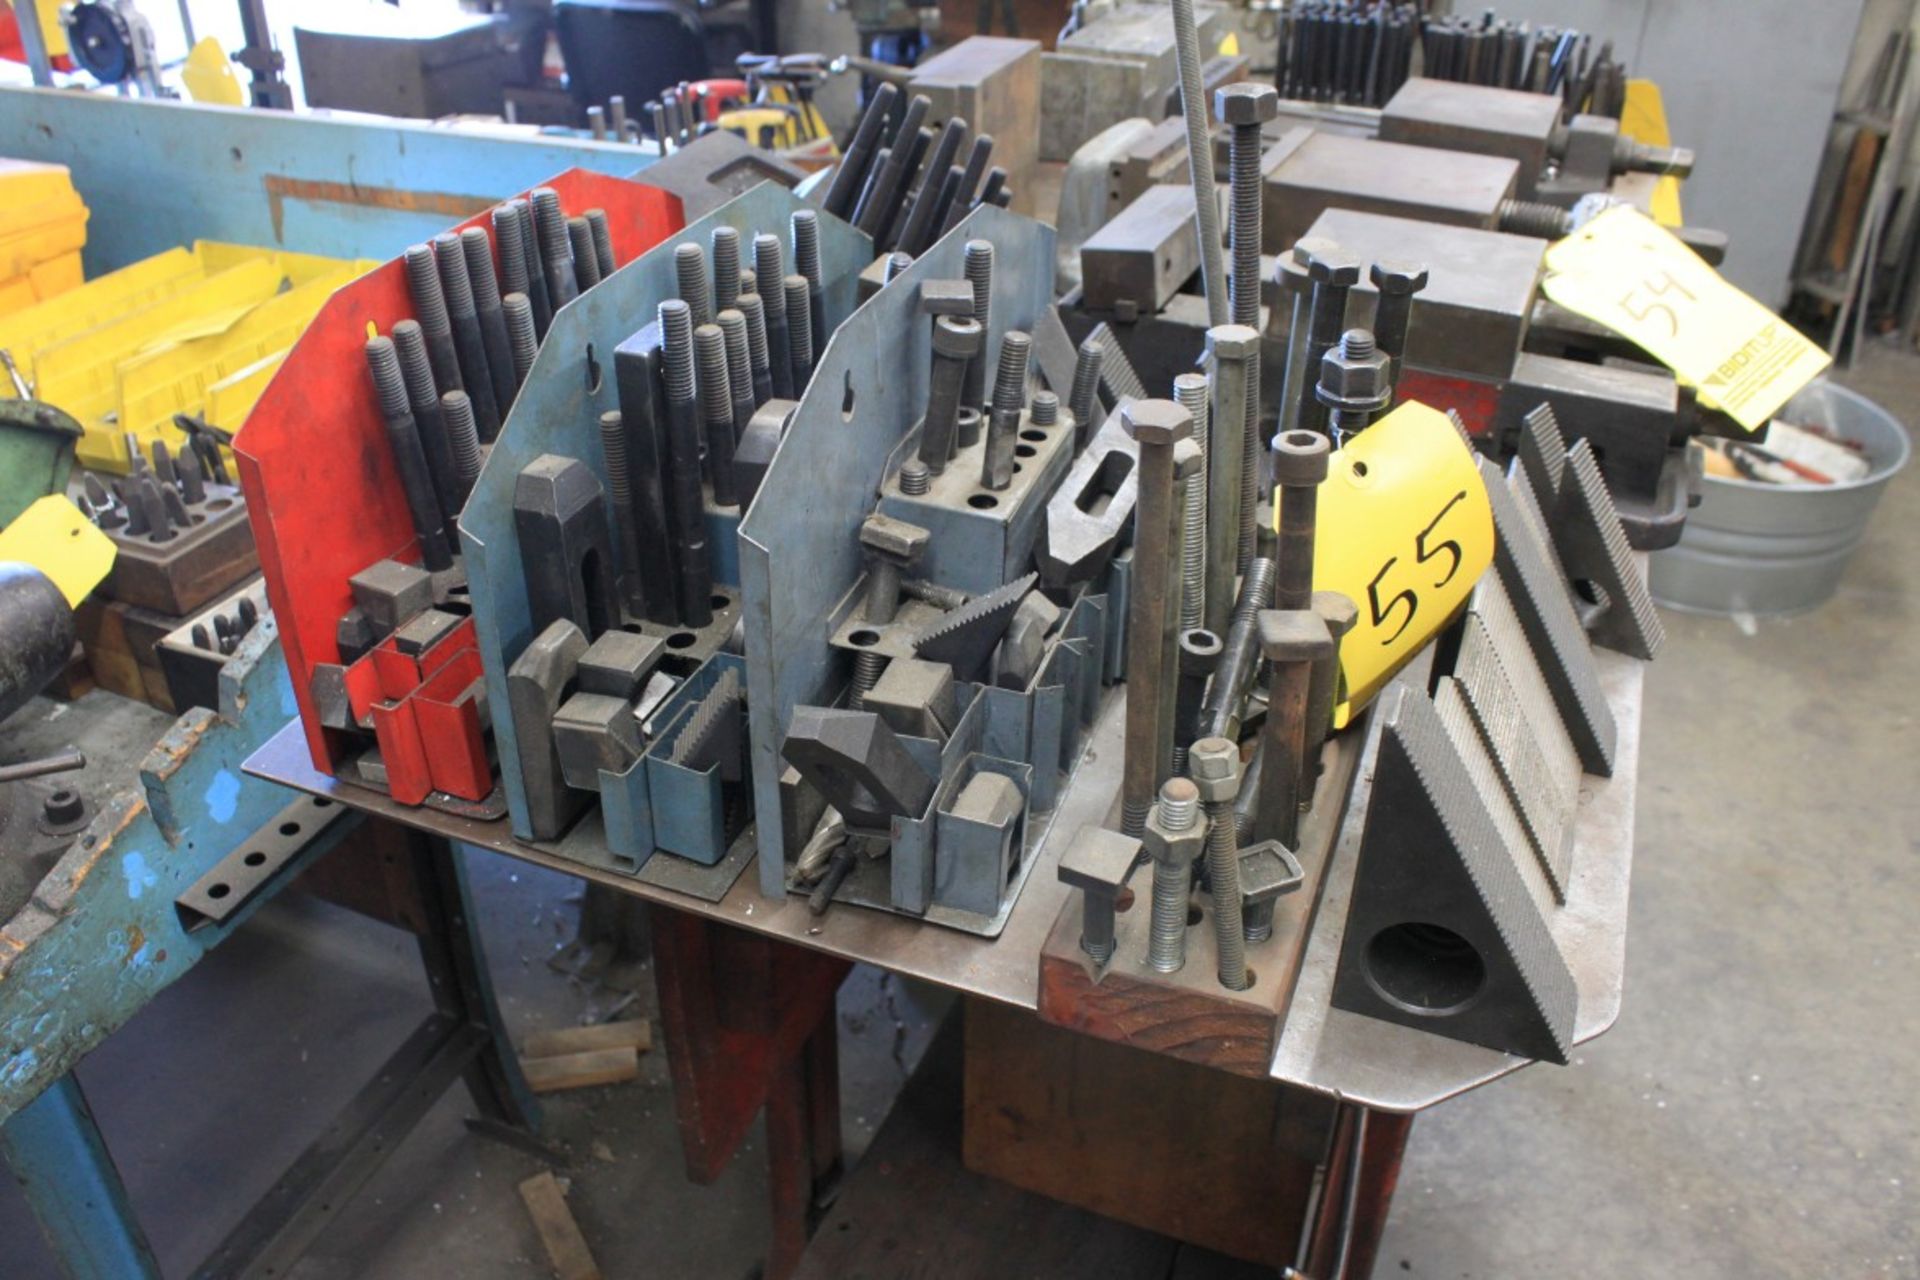 Clamping Sets for Milling Machines (Located at 13938 Fox Street, San Fernando, CA)